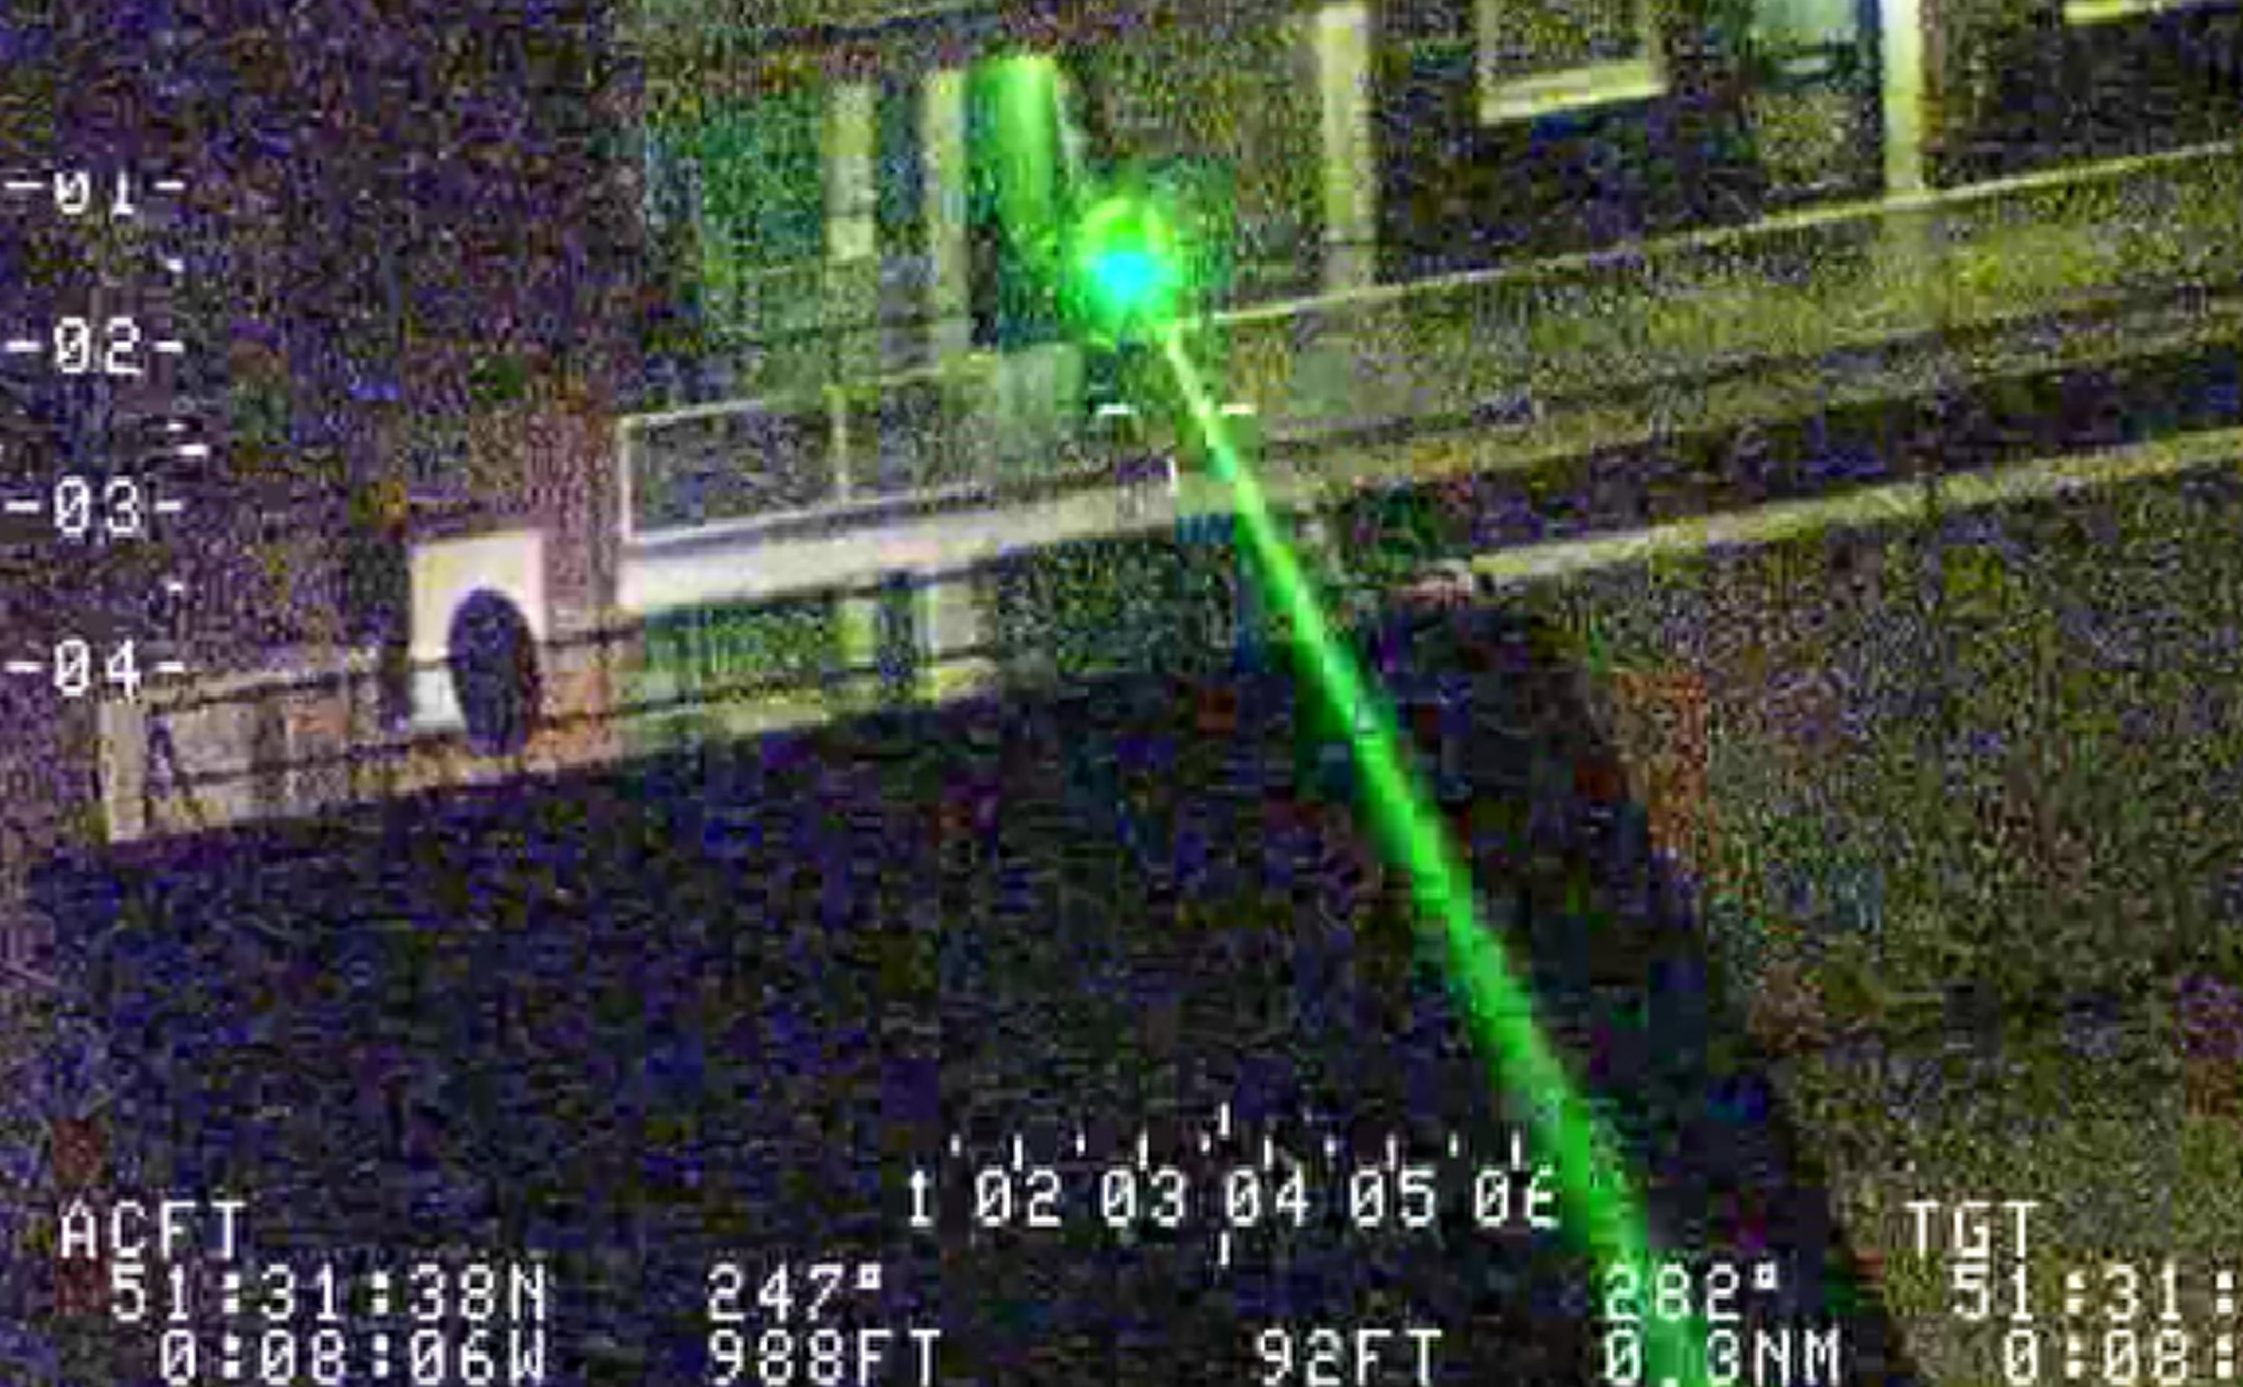 Screengrab from footage dated issued by the National Police Air Service (NPAS) of an incident in which a laser was directed at a police helicopter (NPAS/PA Wire)